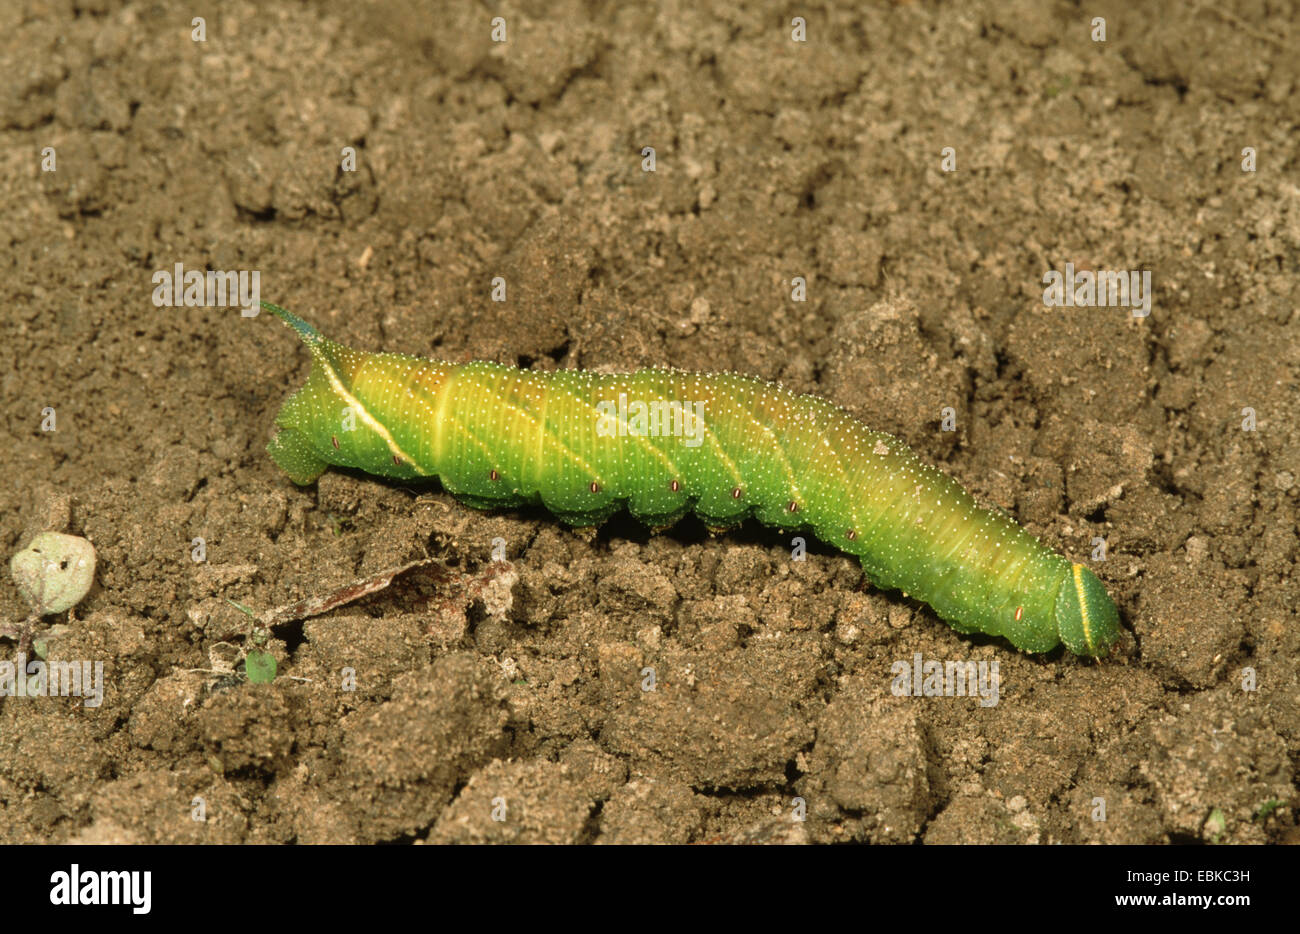 eyed hawkmoth (Smerinthus ocellata), caterpillar just before pupating, Germany Stock Photo